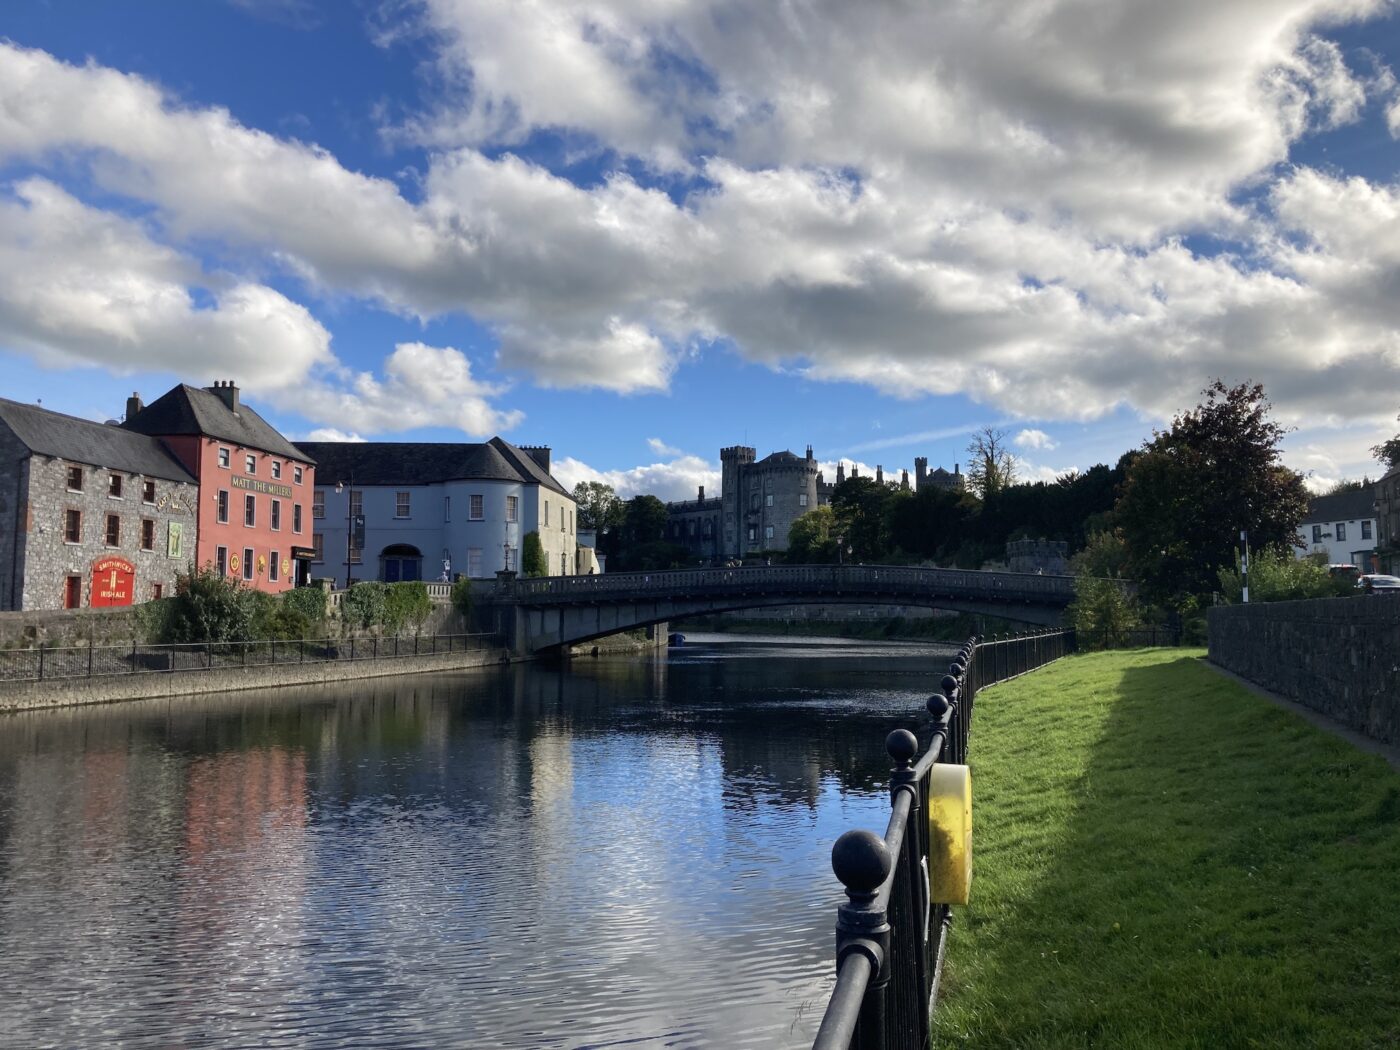 A photo taken by Joseph Rector, of Kilkenny, Ireland with castles, bridges, and a river running through the village.